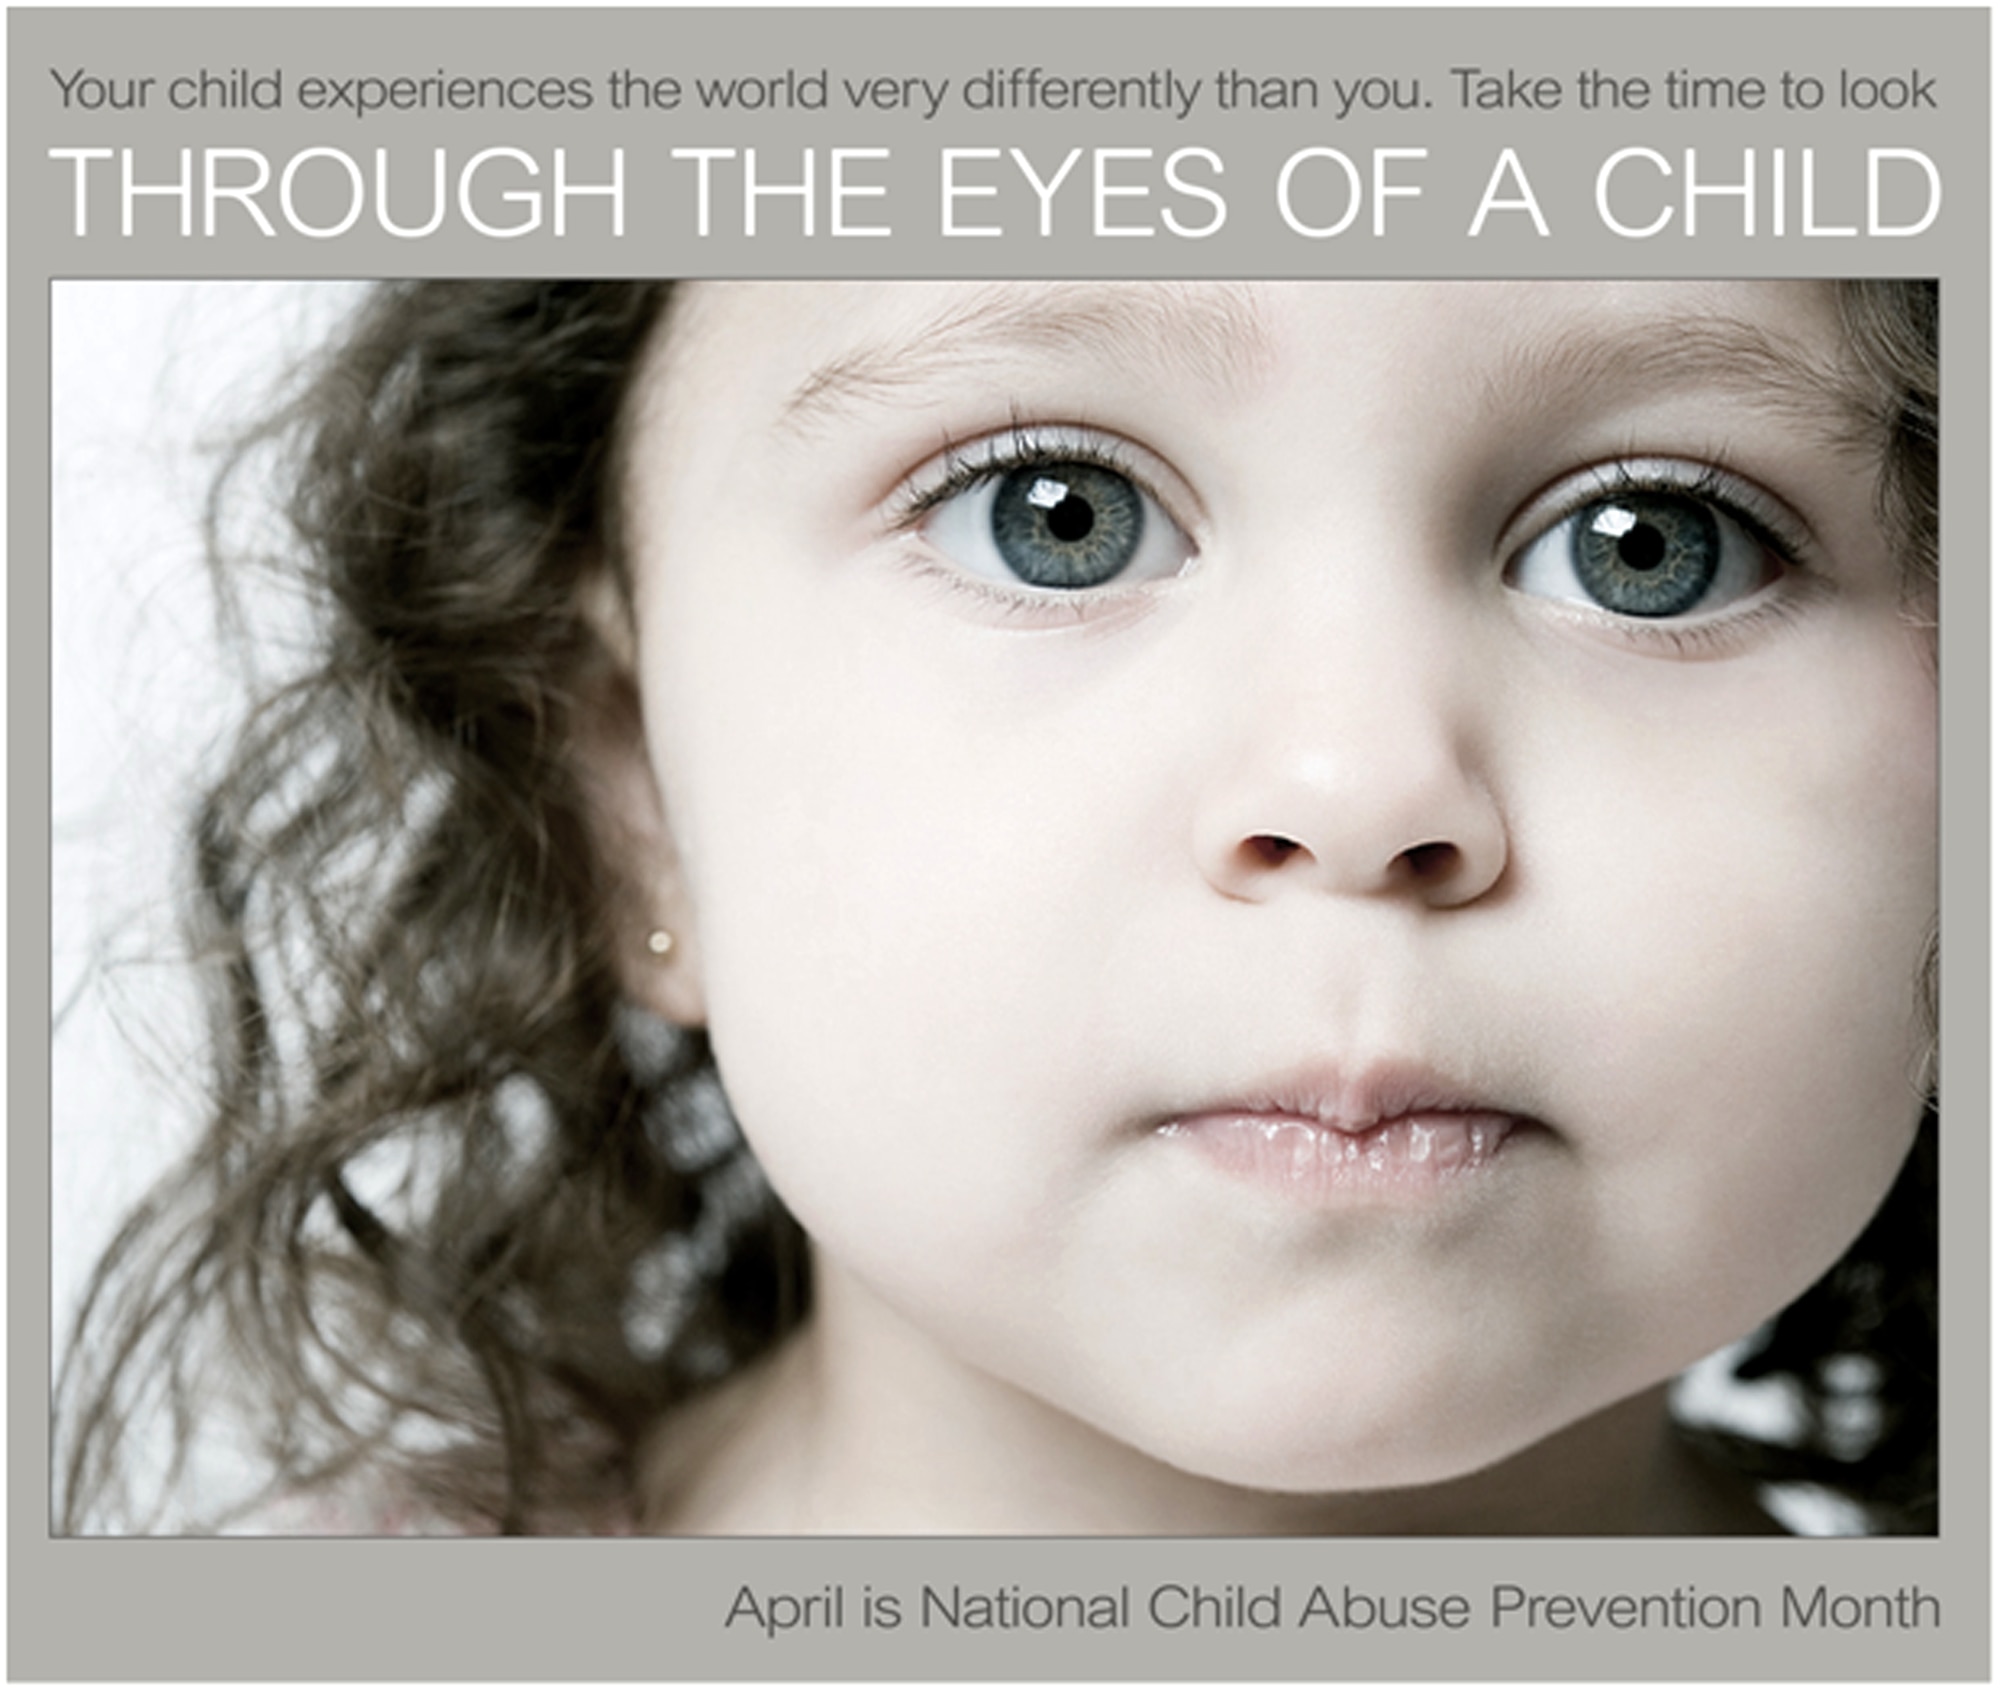 April is National Child Abuse Prevention Month. (Courtesy image)